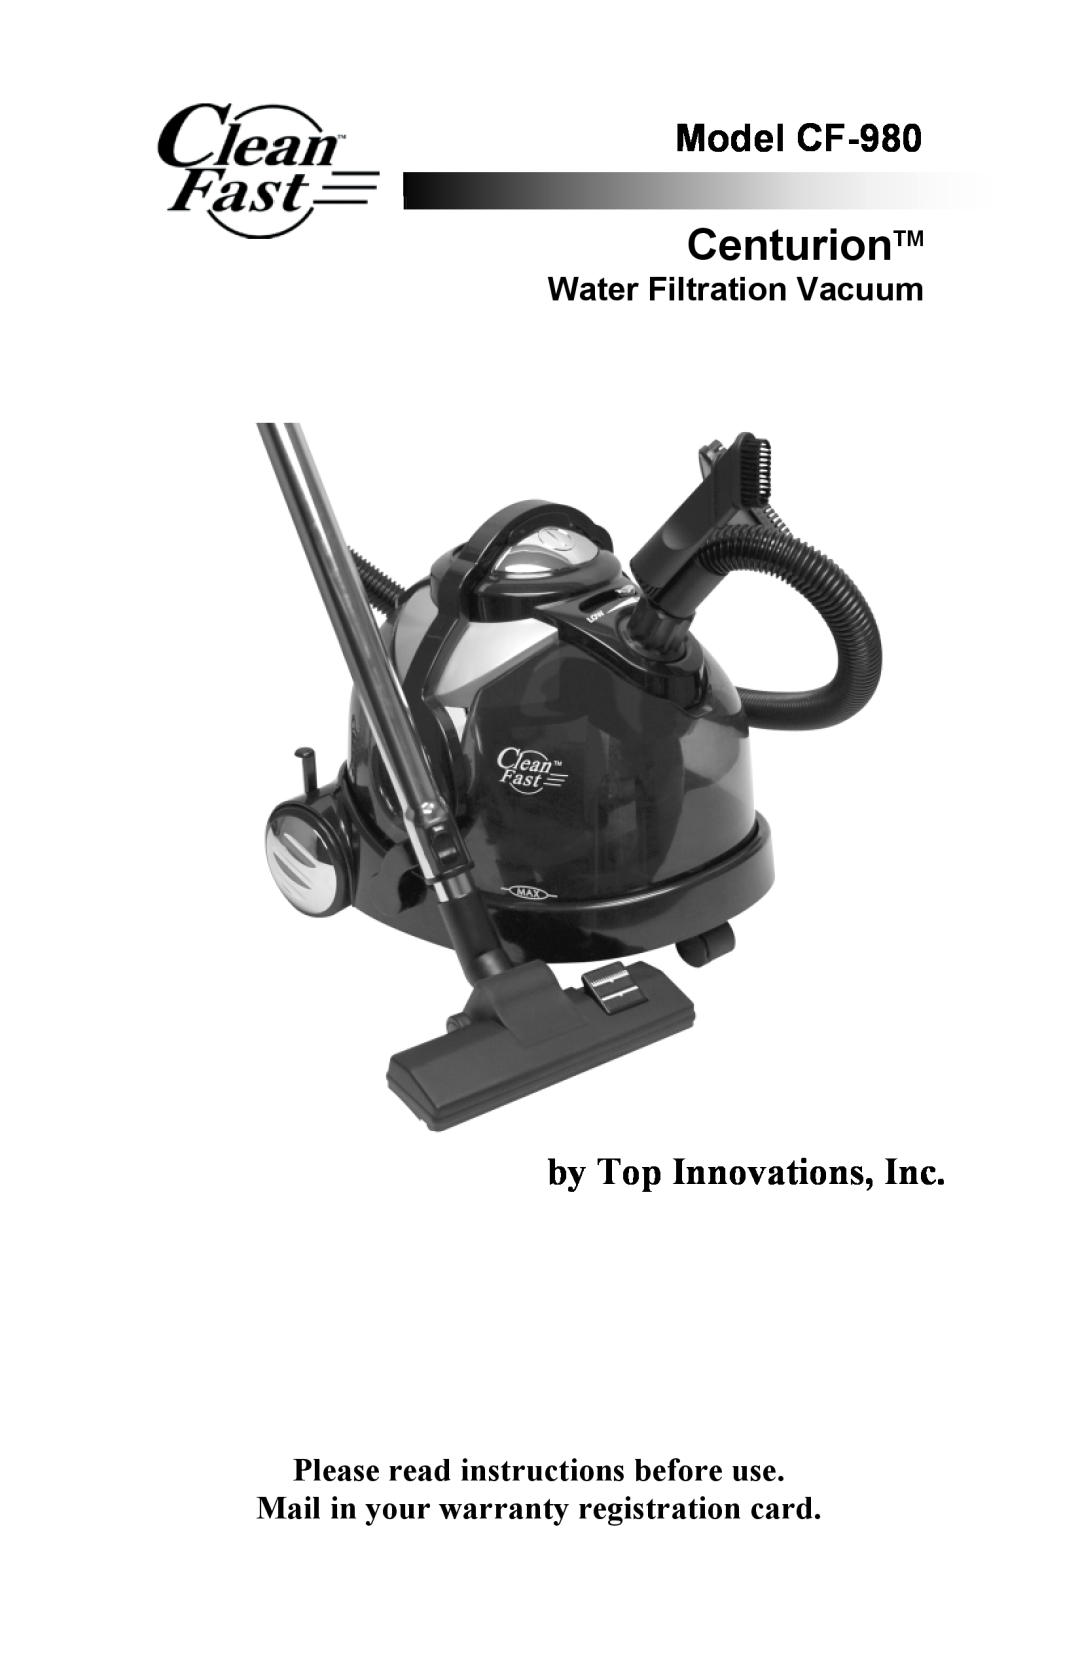 Top Innovations warranty by Top Innovations, Inc, CenturionTM, Model CF-980, Water Filtration Vacuum 